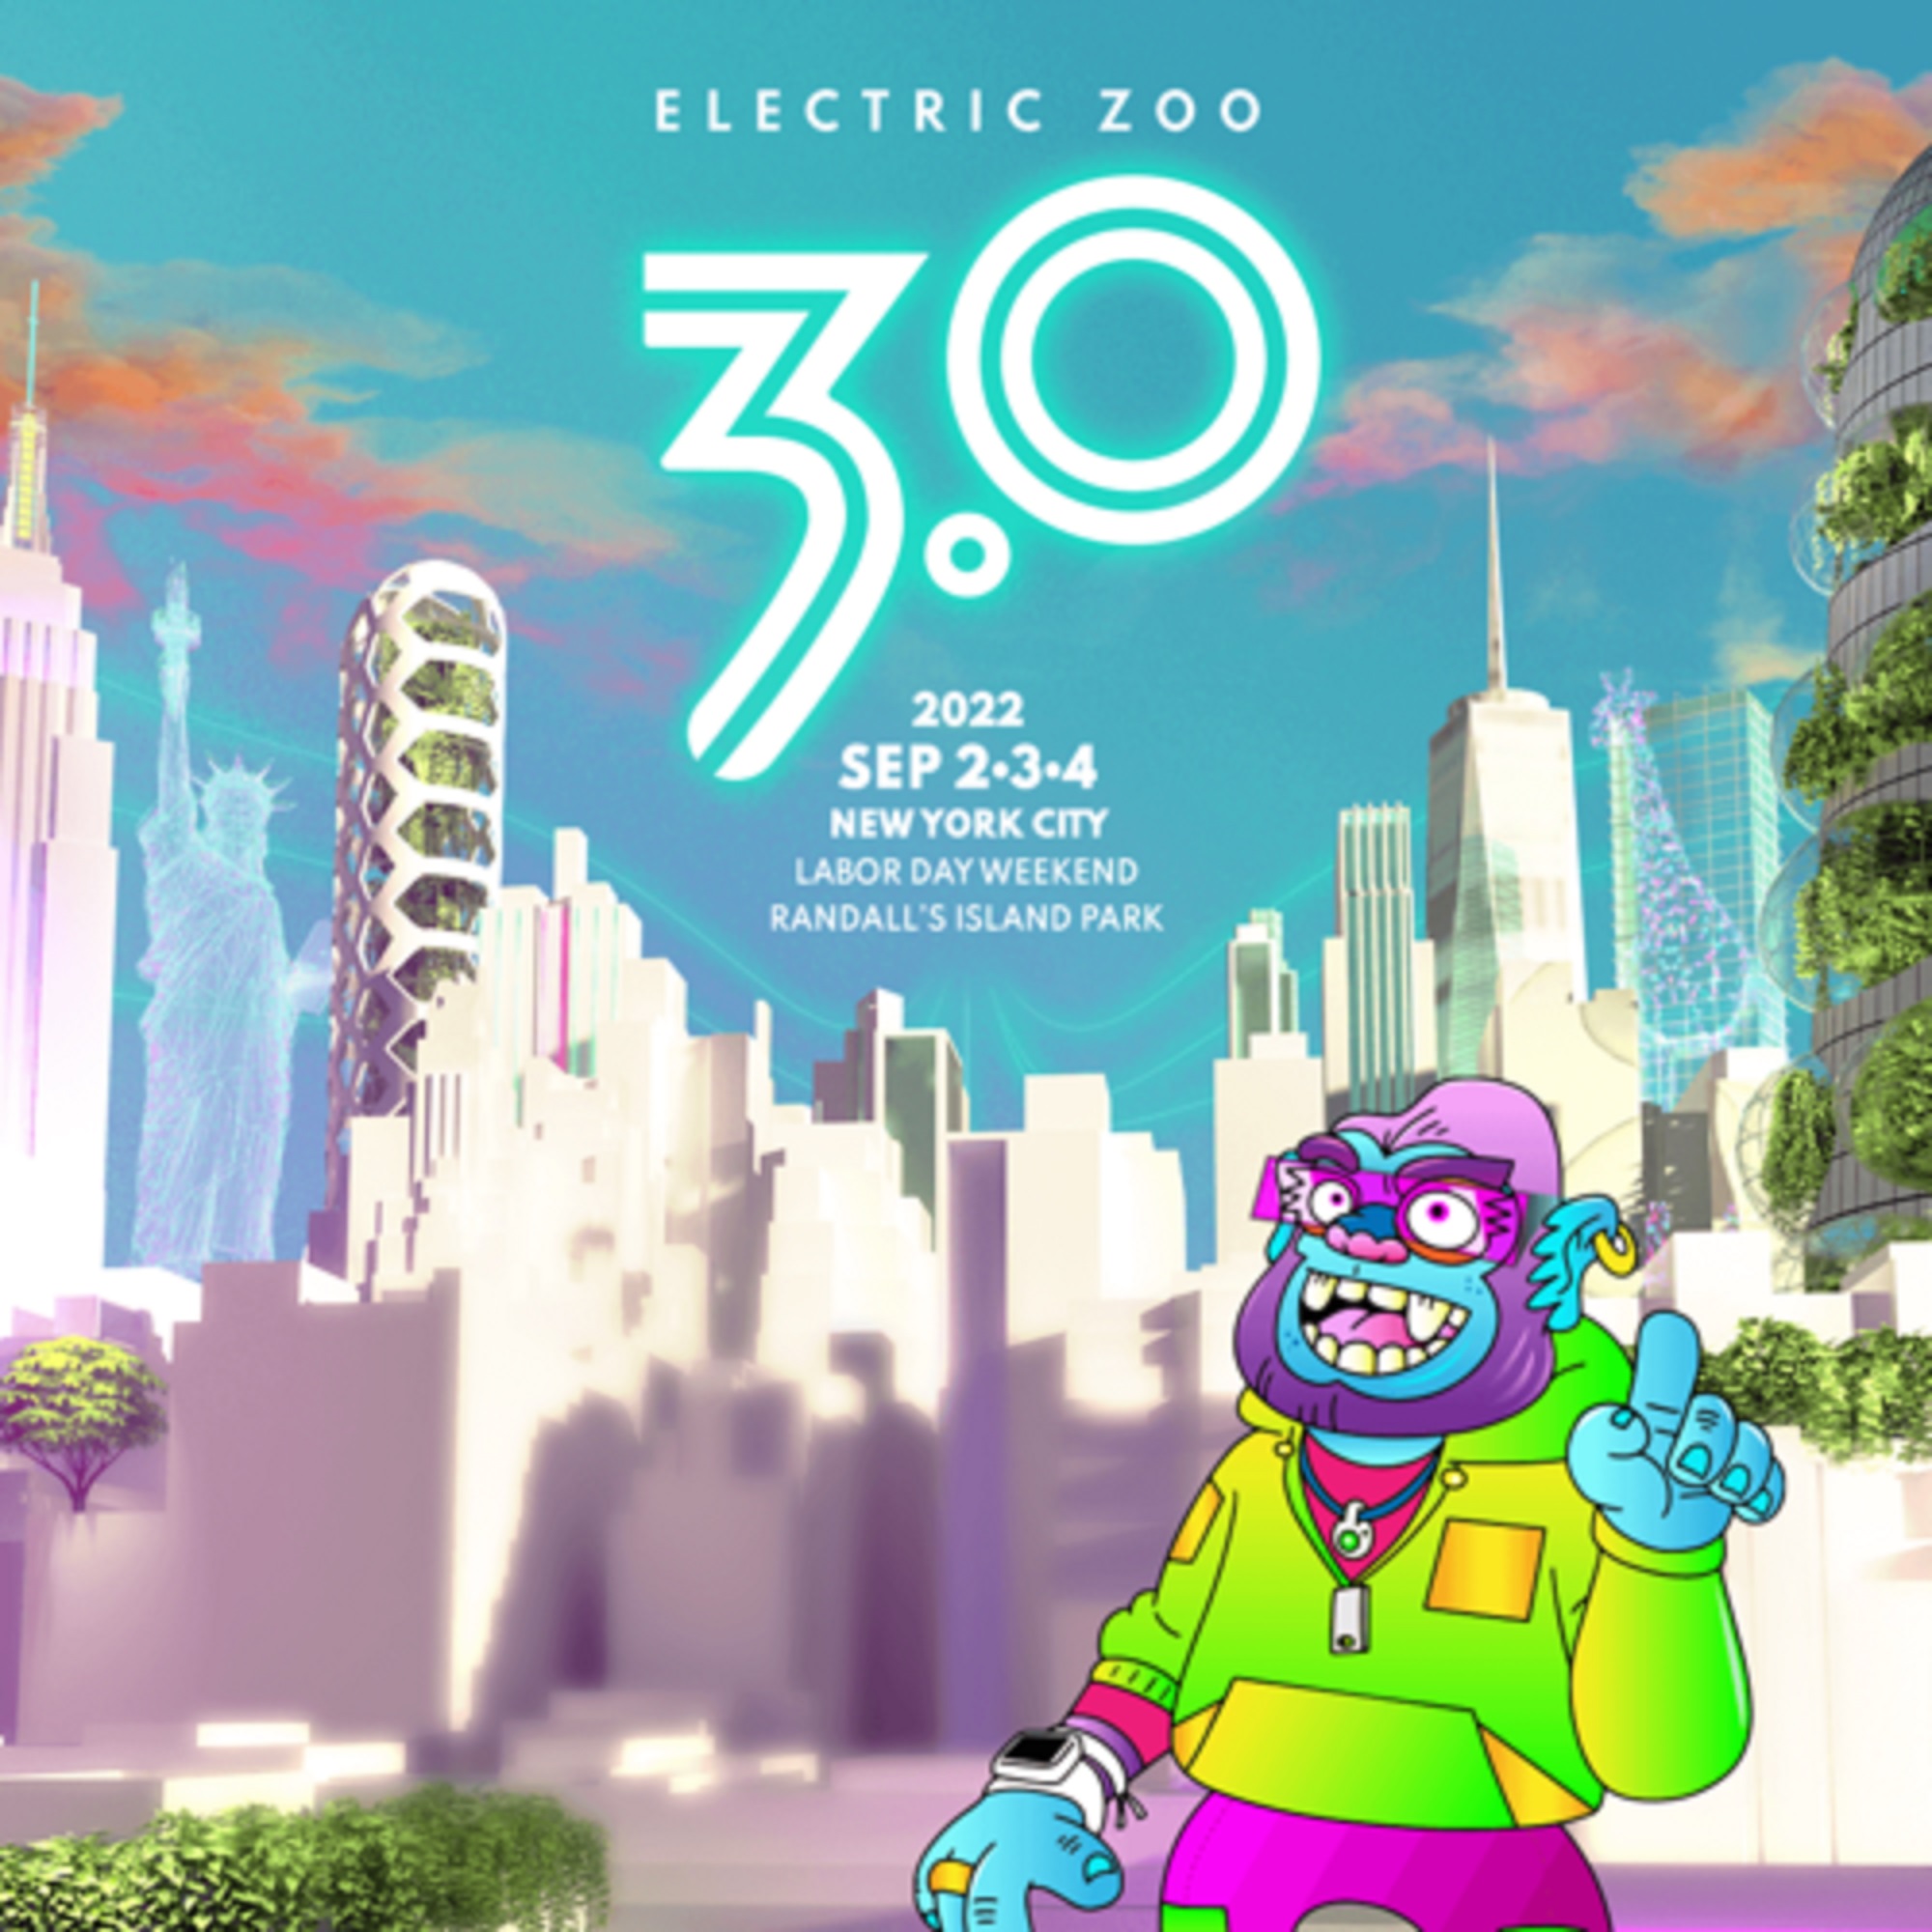  Electric Zoo 3.0 Reveals Theme for 2022 Festival Labor Day Weekend 2022